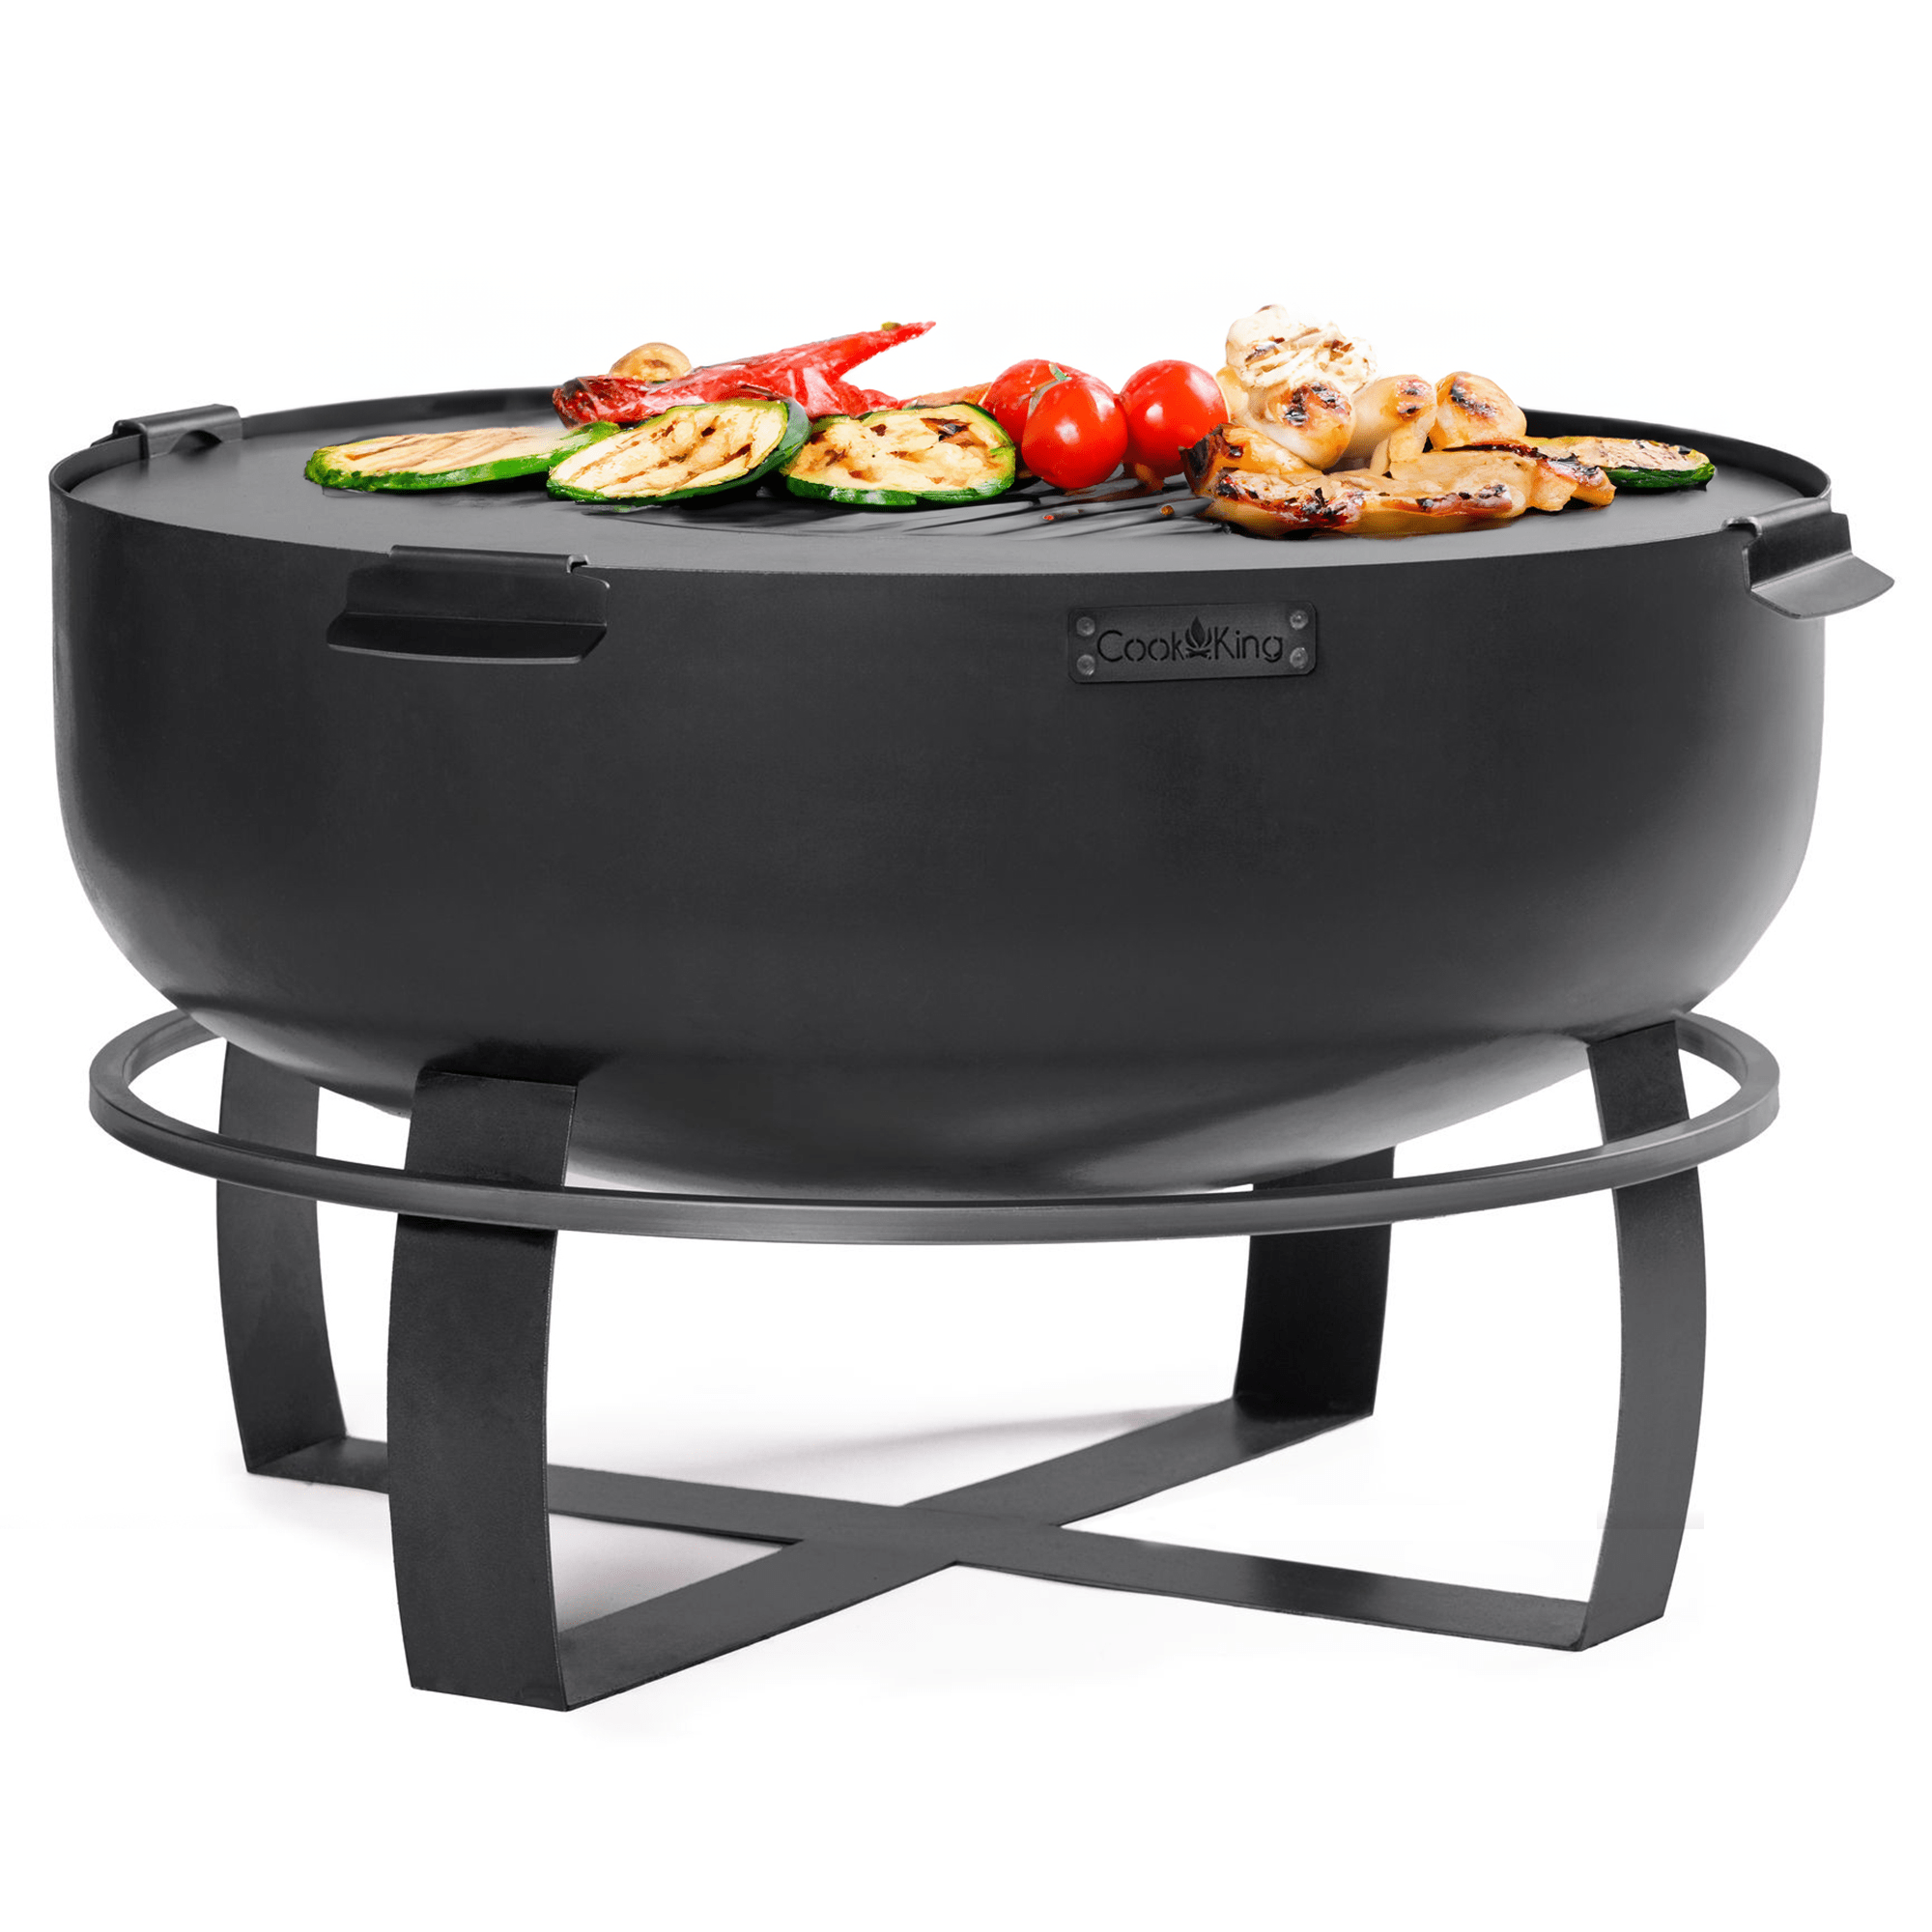 Ignition 32" XXL Fire Pit with Grill Plate - Good Directions